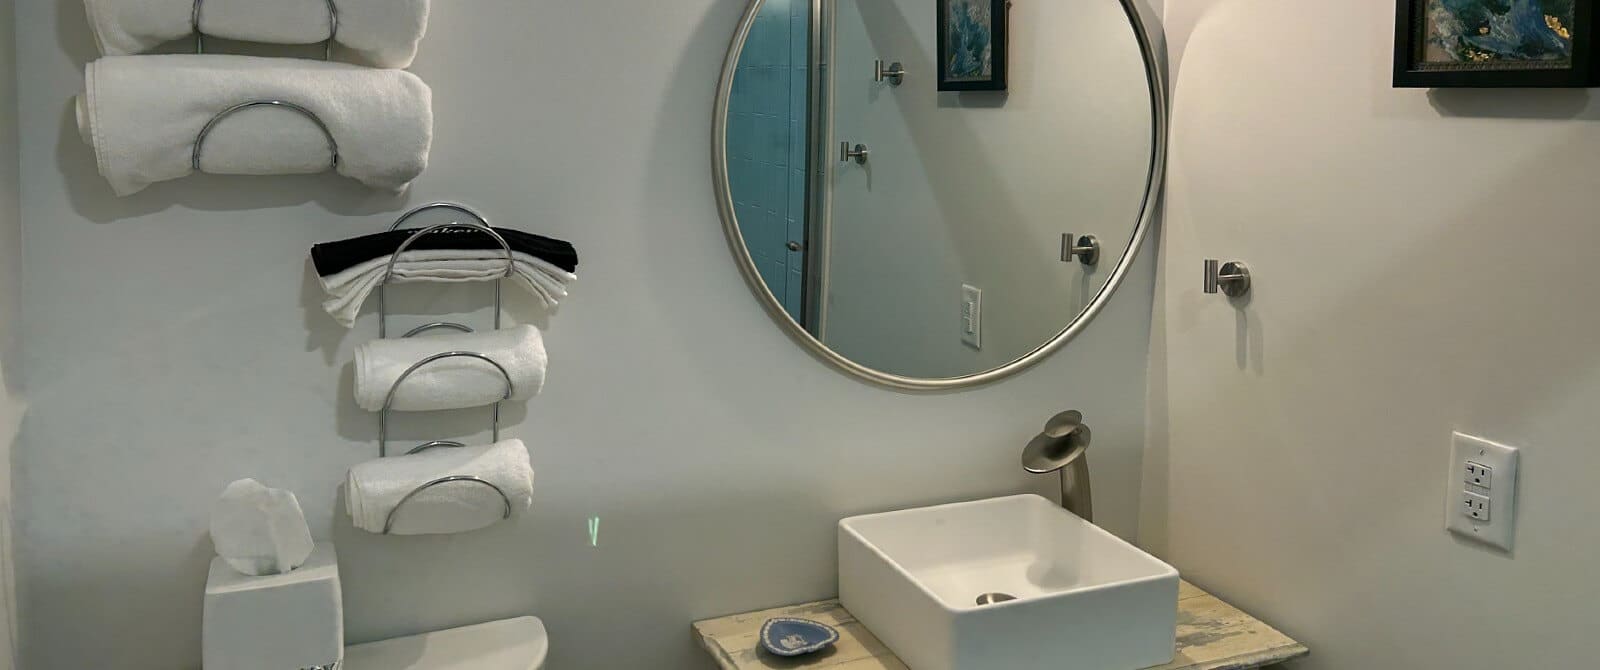 Bathroom with square table top sink, round mirror and silver racks with folded towels